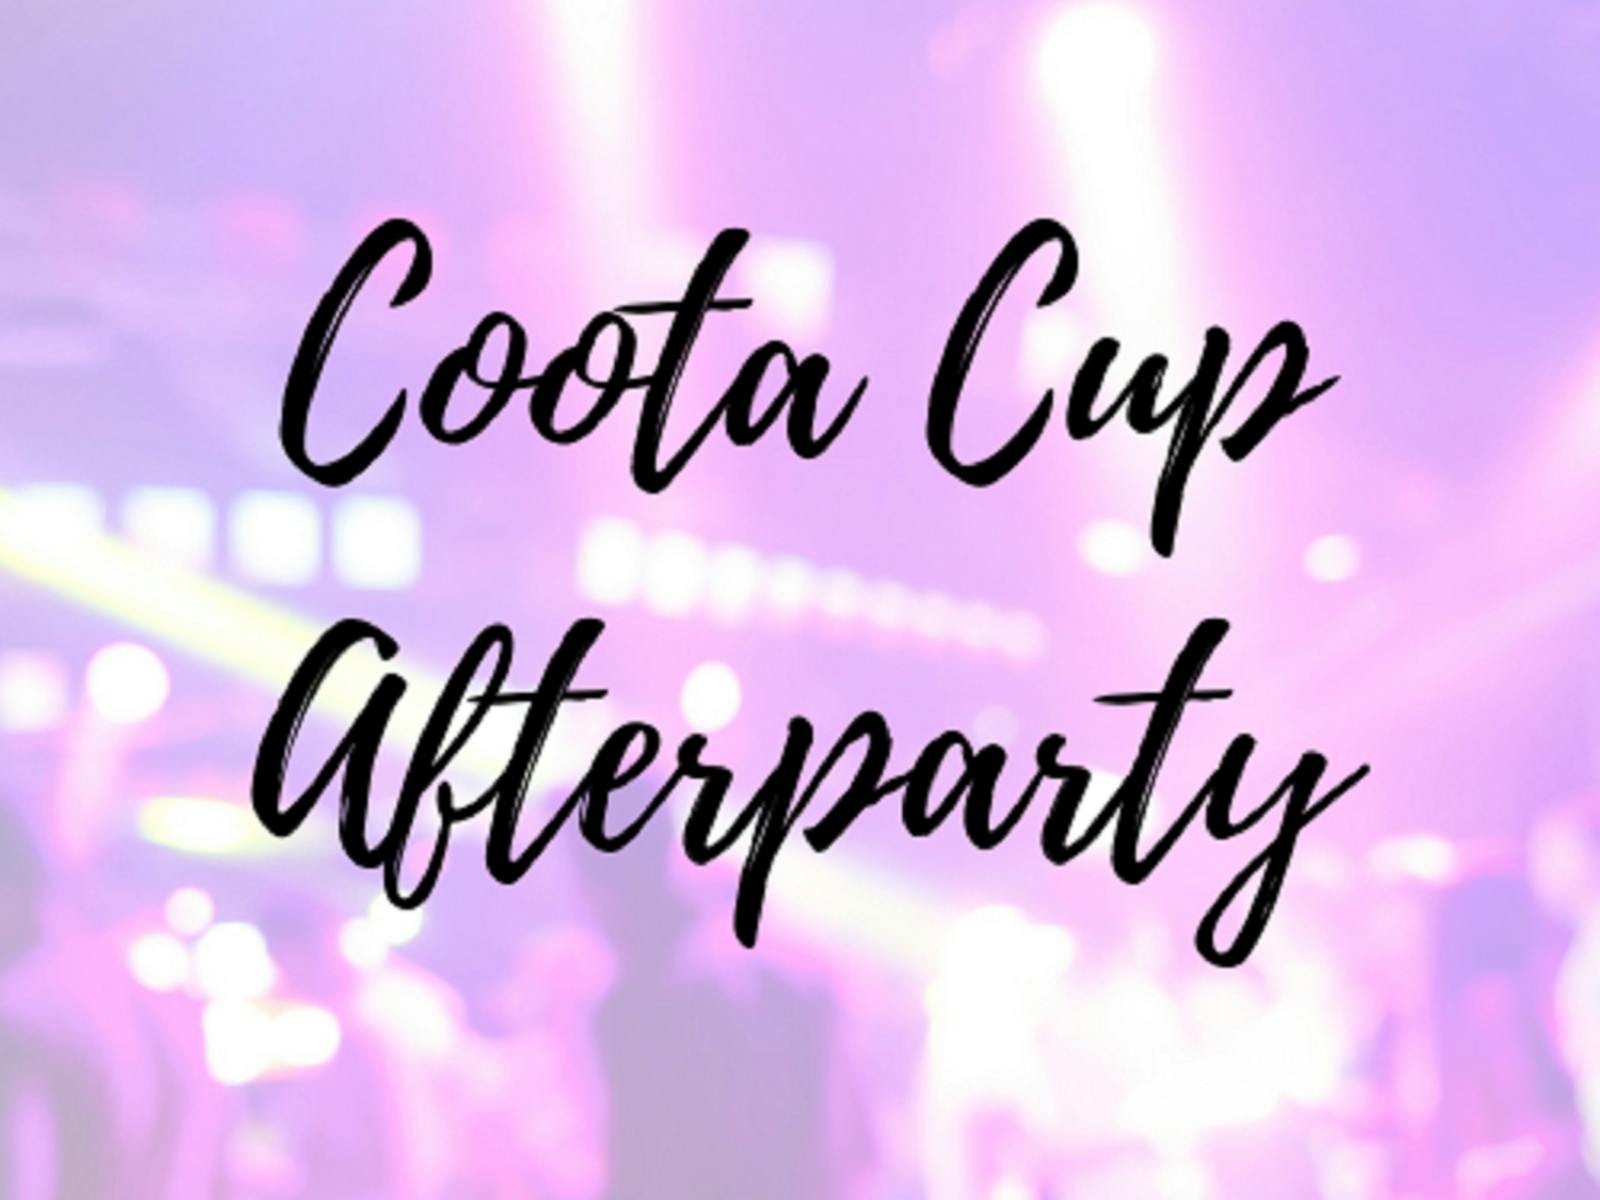 Image for Cootamundra Cup Afterparty